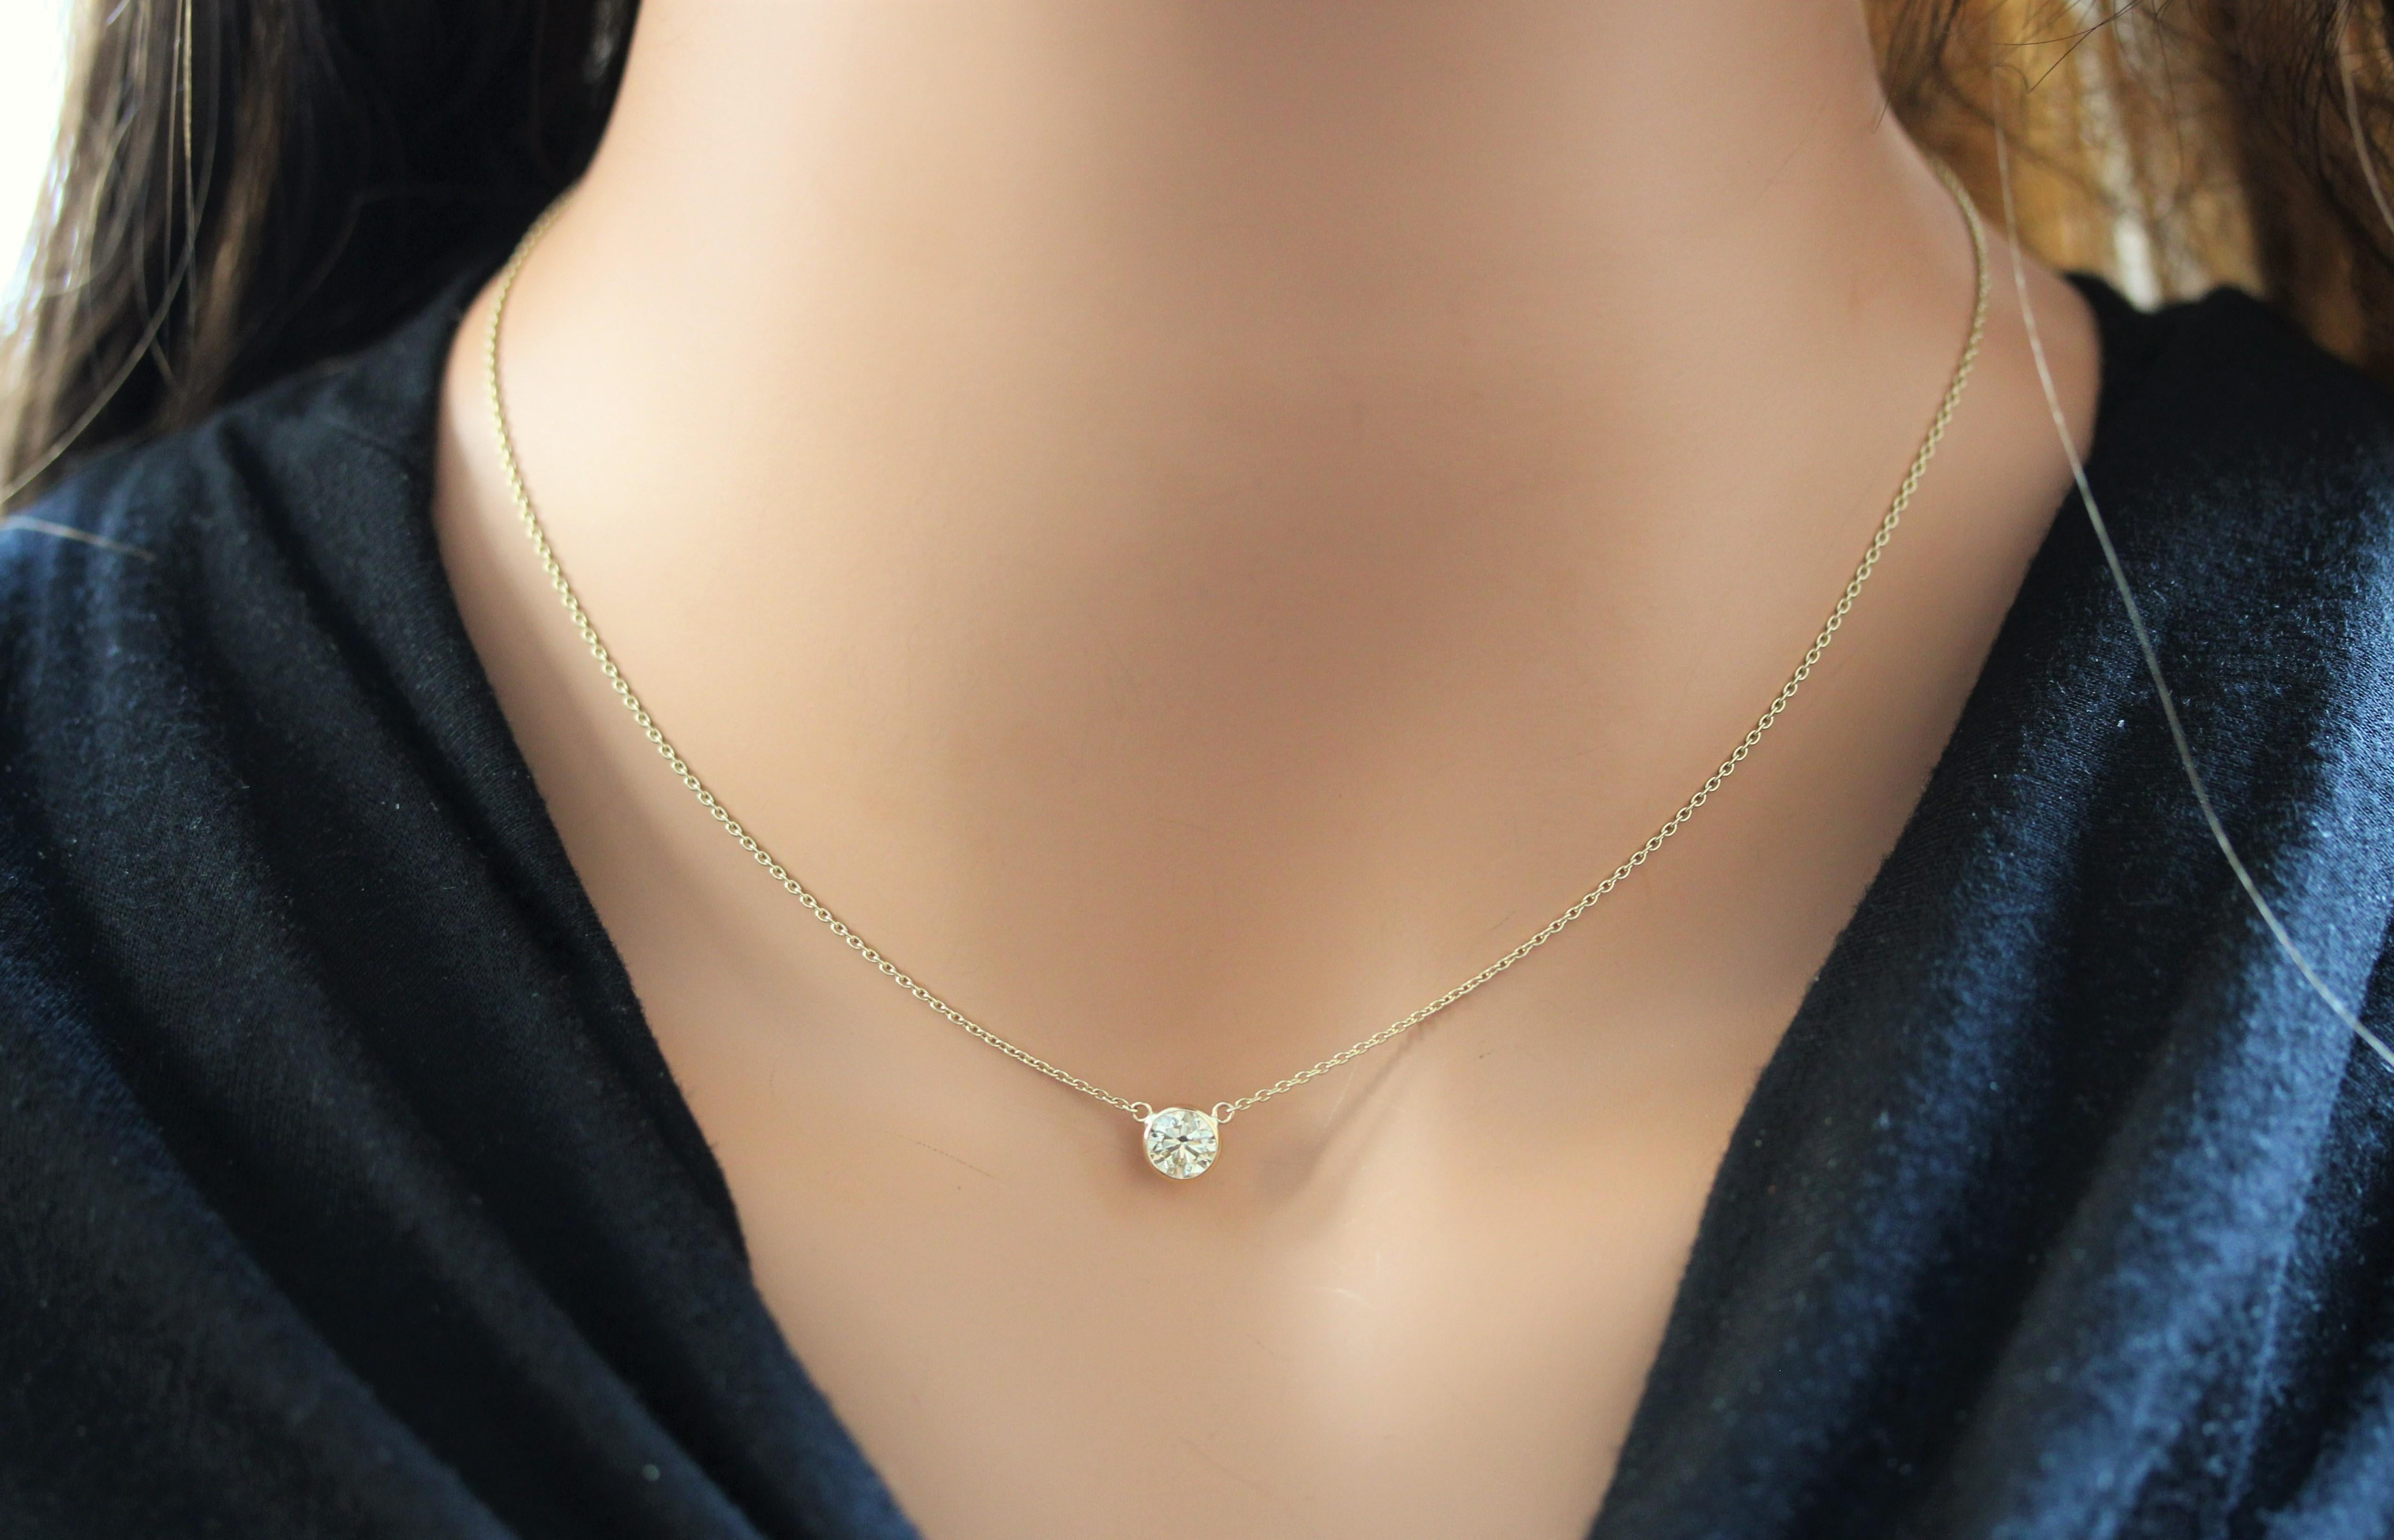 Make a statement worn solo and level up your collar candy when layered. How would you wear it? This is a natural Necklaces-Fashion, gem type, color L and clarity SI1, handmade necklace wire-wrapped in 14k yellow gold. This is a piece you'll wear